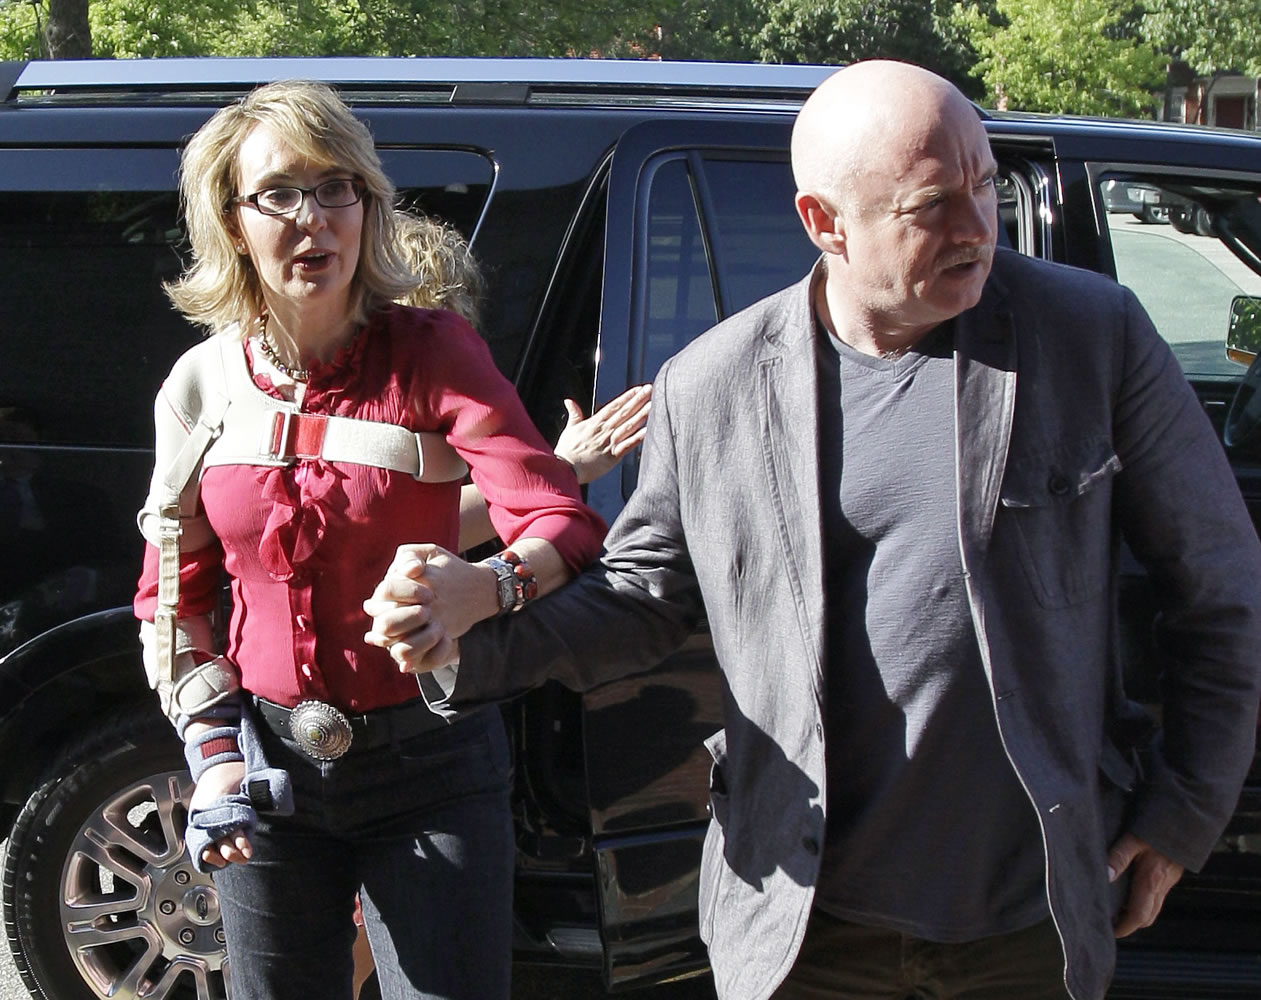 Former Arizona Rep. Gabrielle Giffords and her husband, retired astronaut and combat veteran Capt. Mark Kelly, arrive to meet with local supporters and parents of Sandy Hook Elementary School victims Friday at the Orchard Street Chop Shop in Dover, N.H.